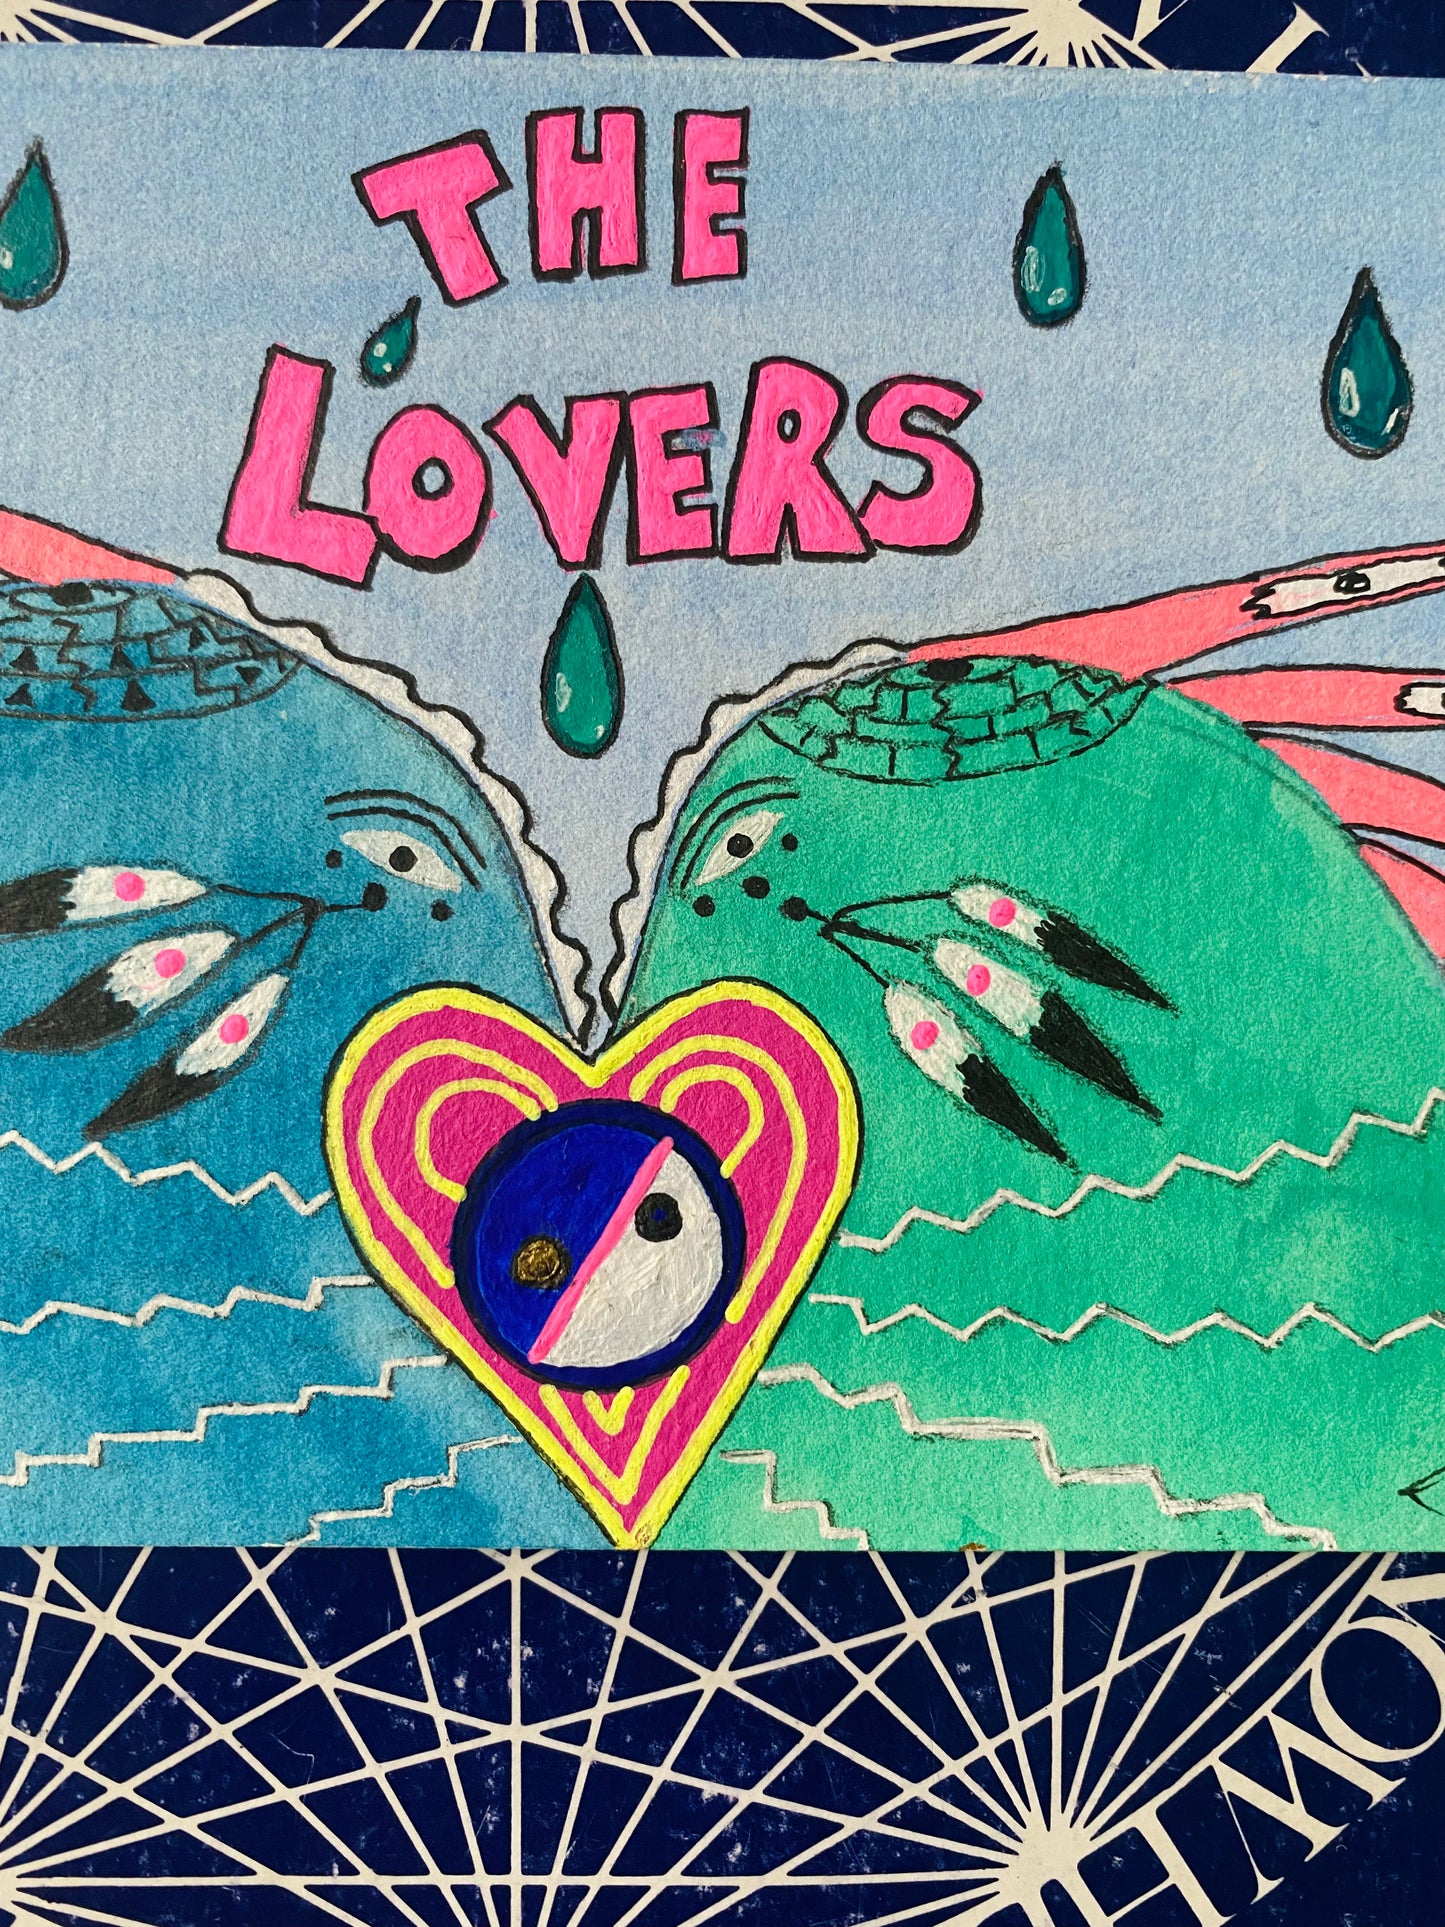 The Lovers-555 Original 4x6 - Moon Room Shop and Wellness